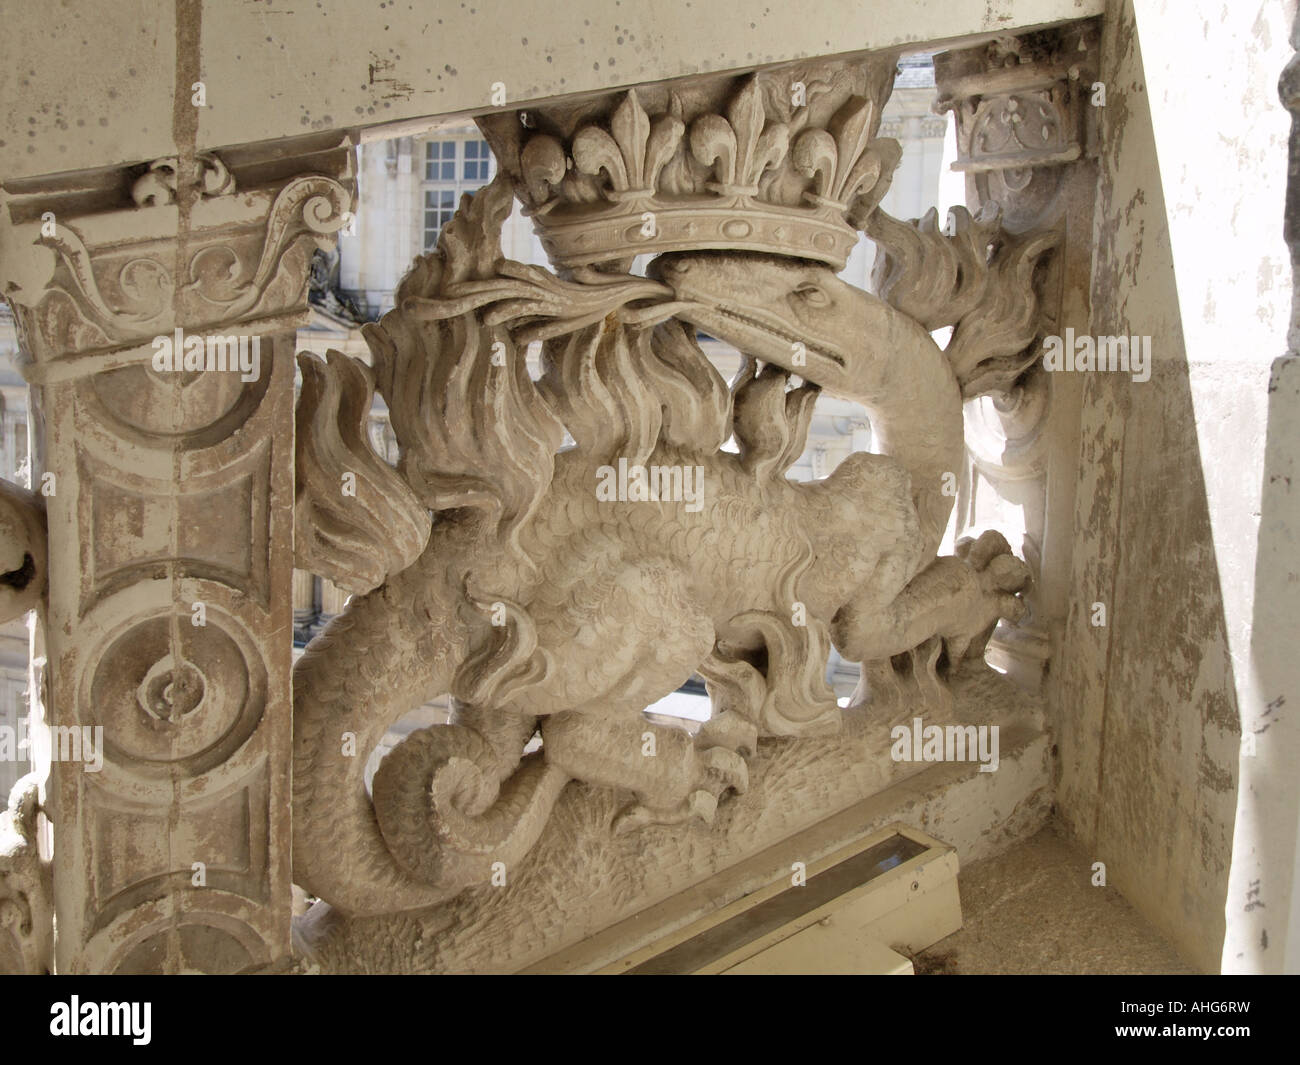 The lizard royal symbol on the famous Blois castle staircase Blois Loire Valley France Stock Photo